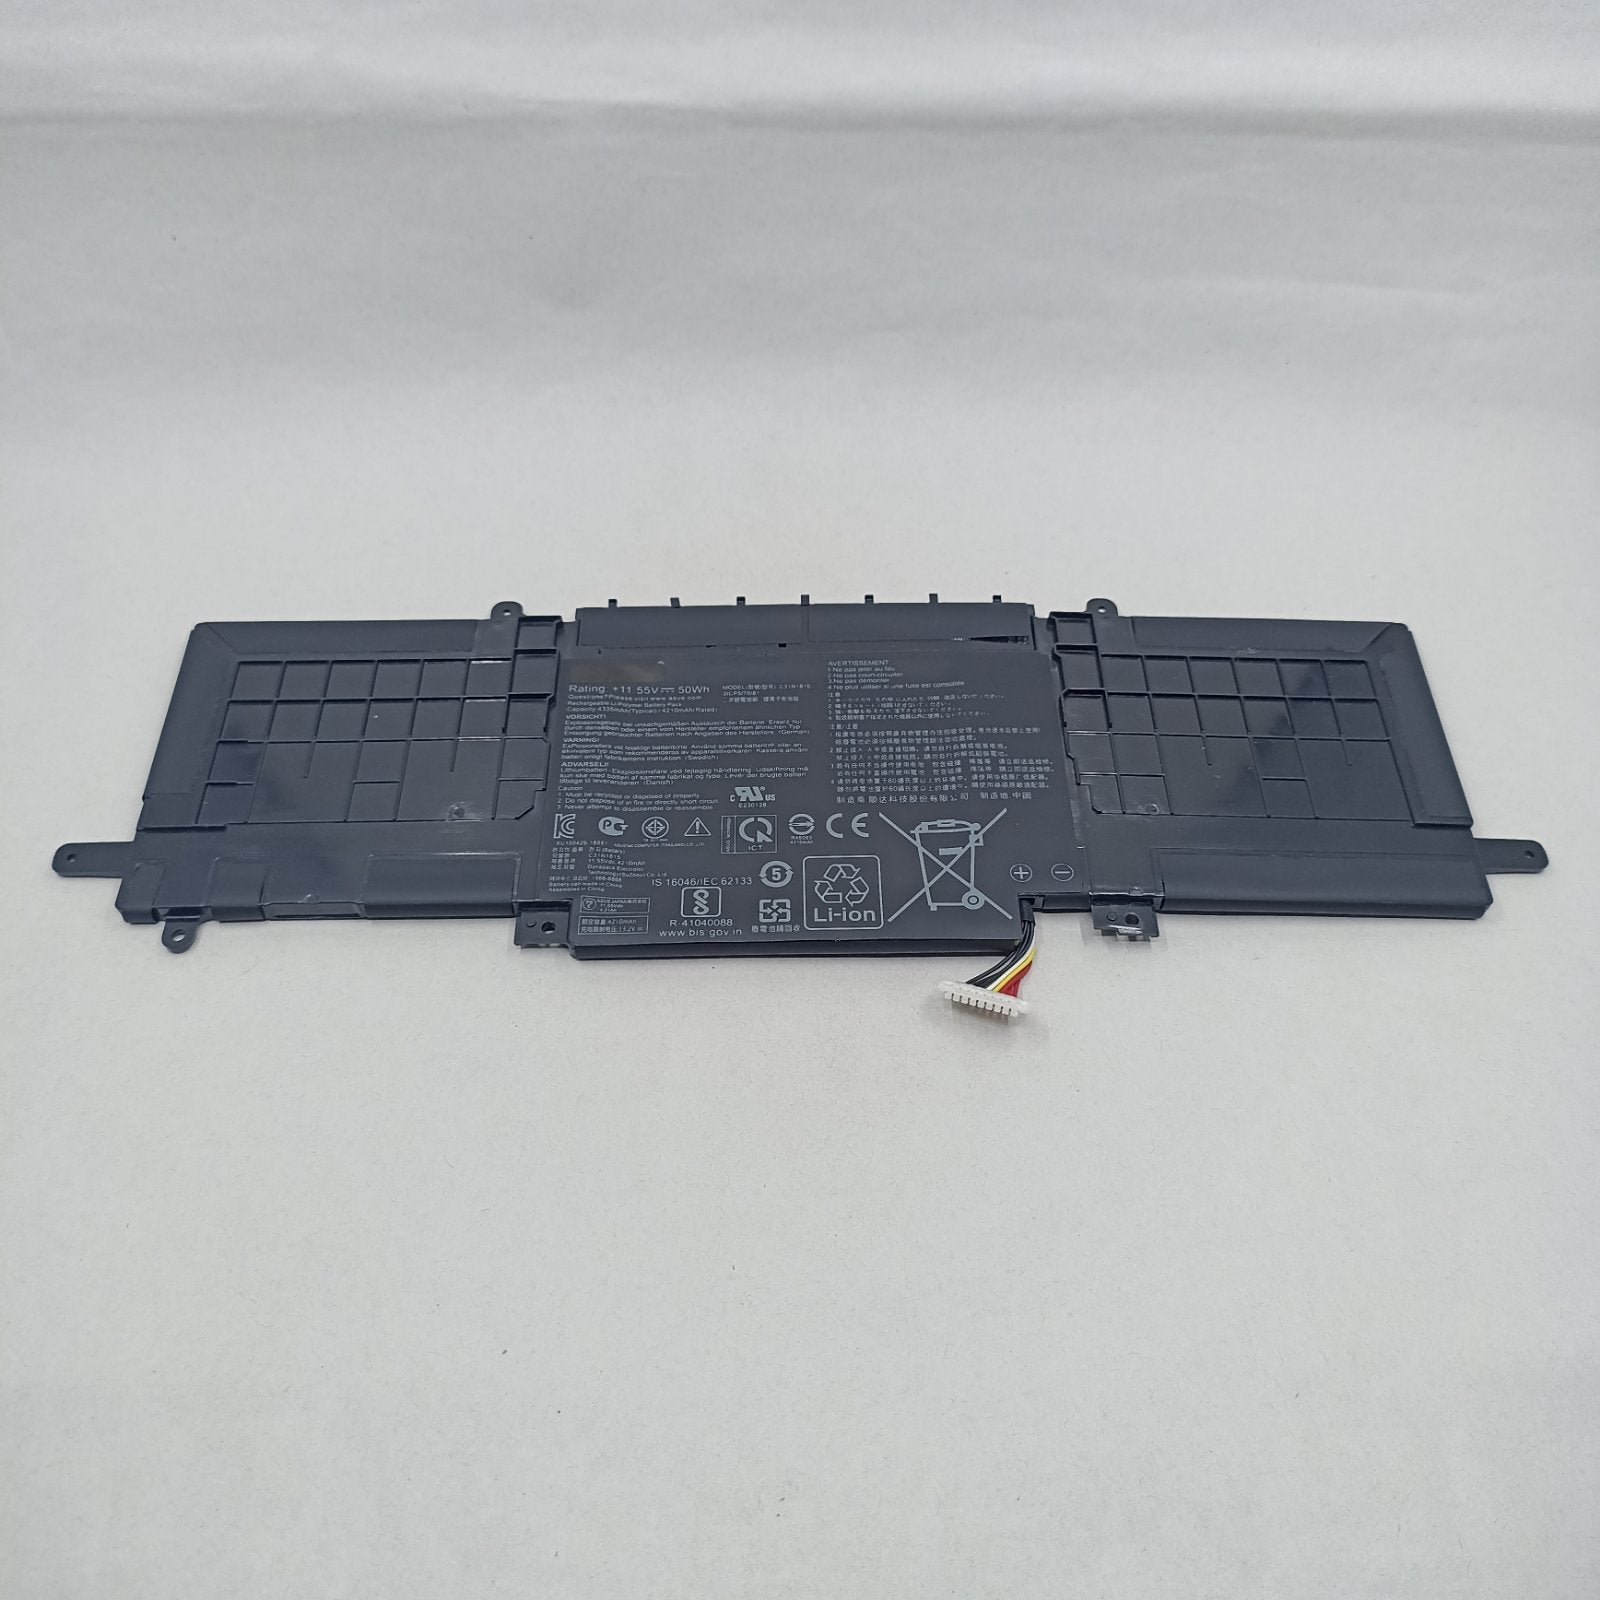 Replacement Battery for Asus UX333FN A1